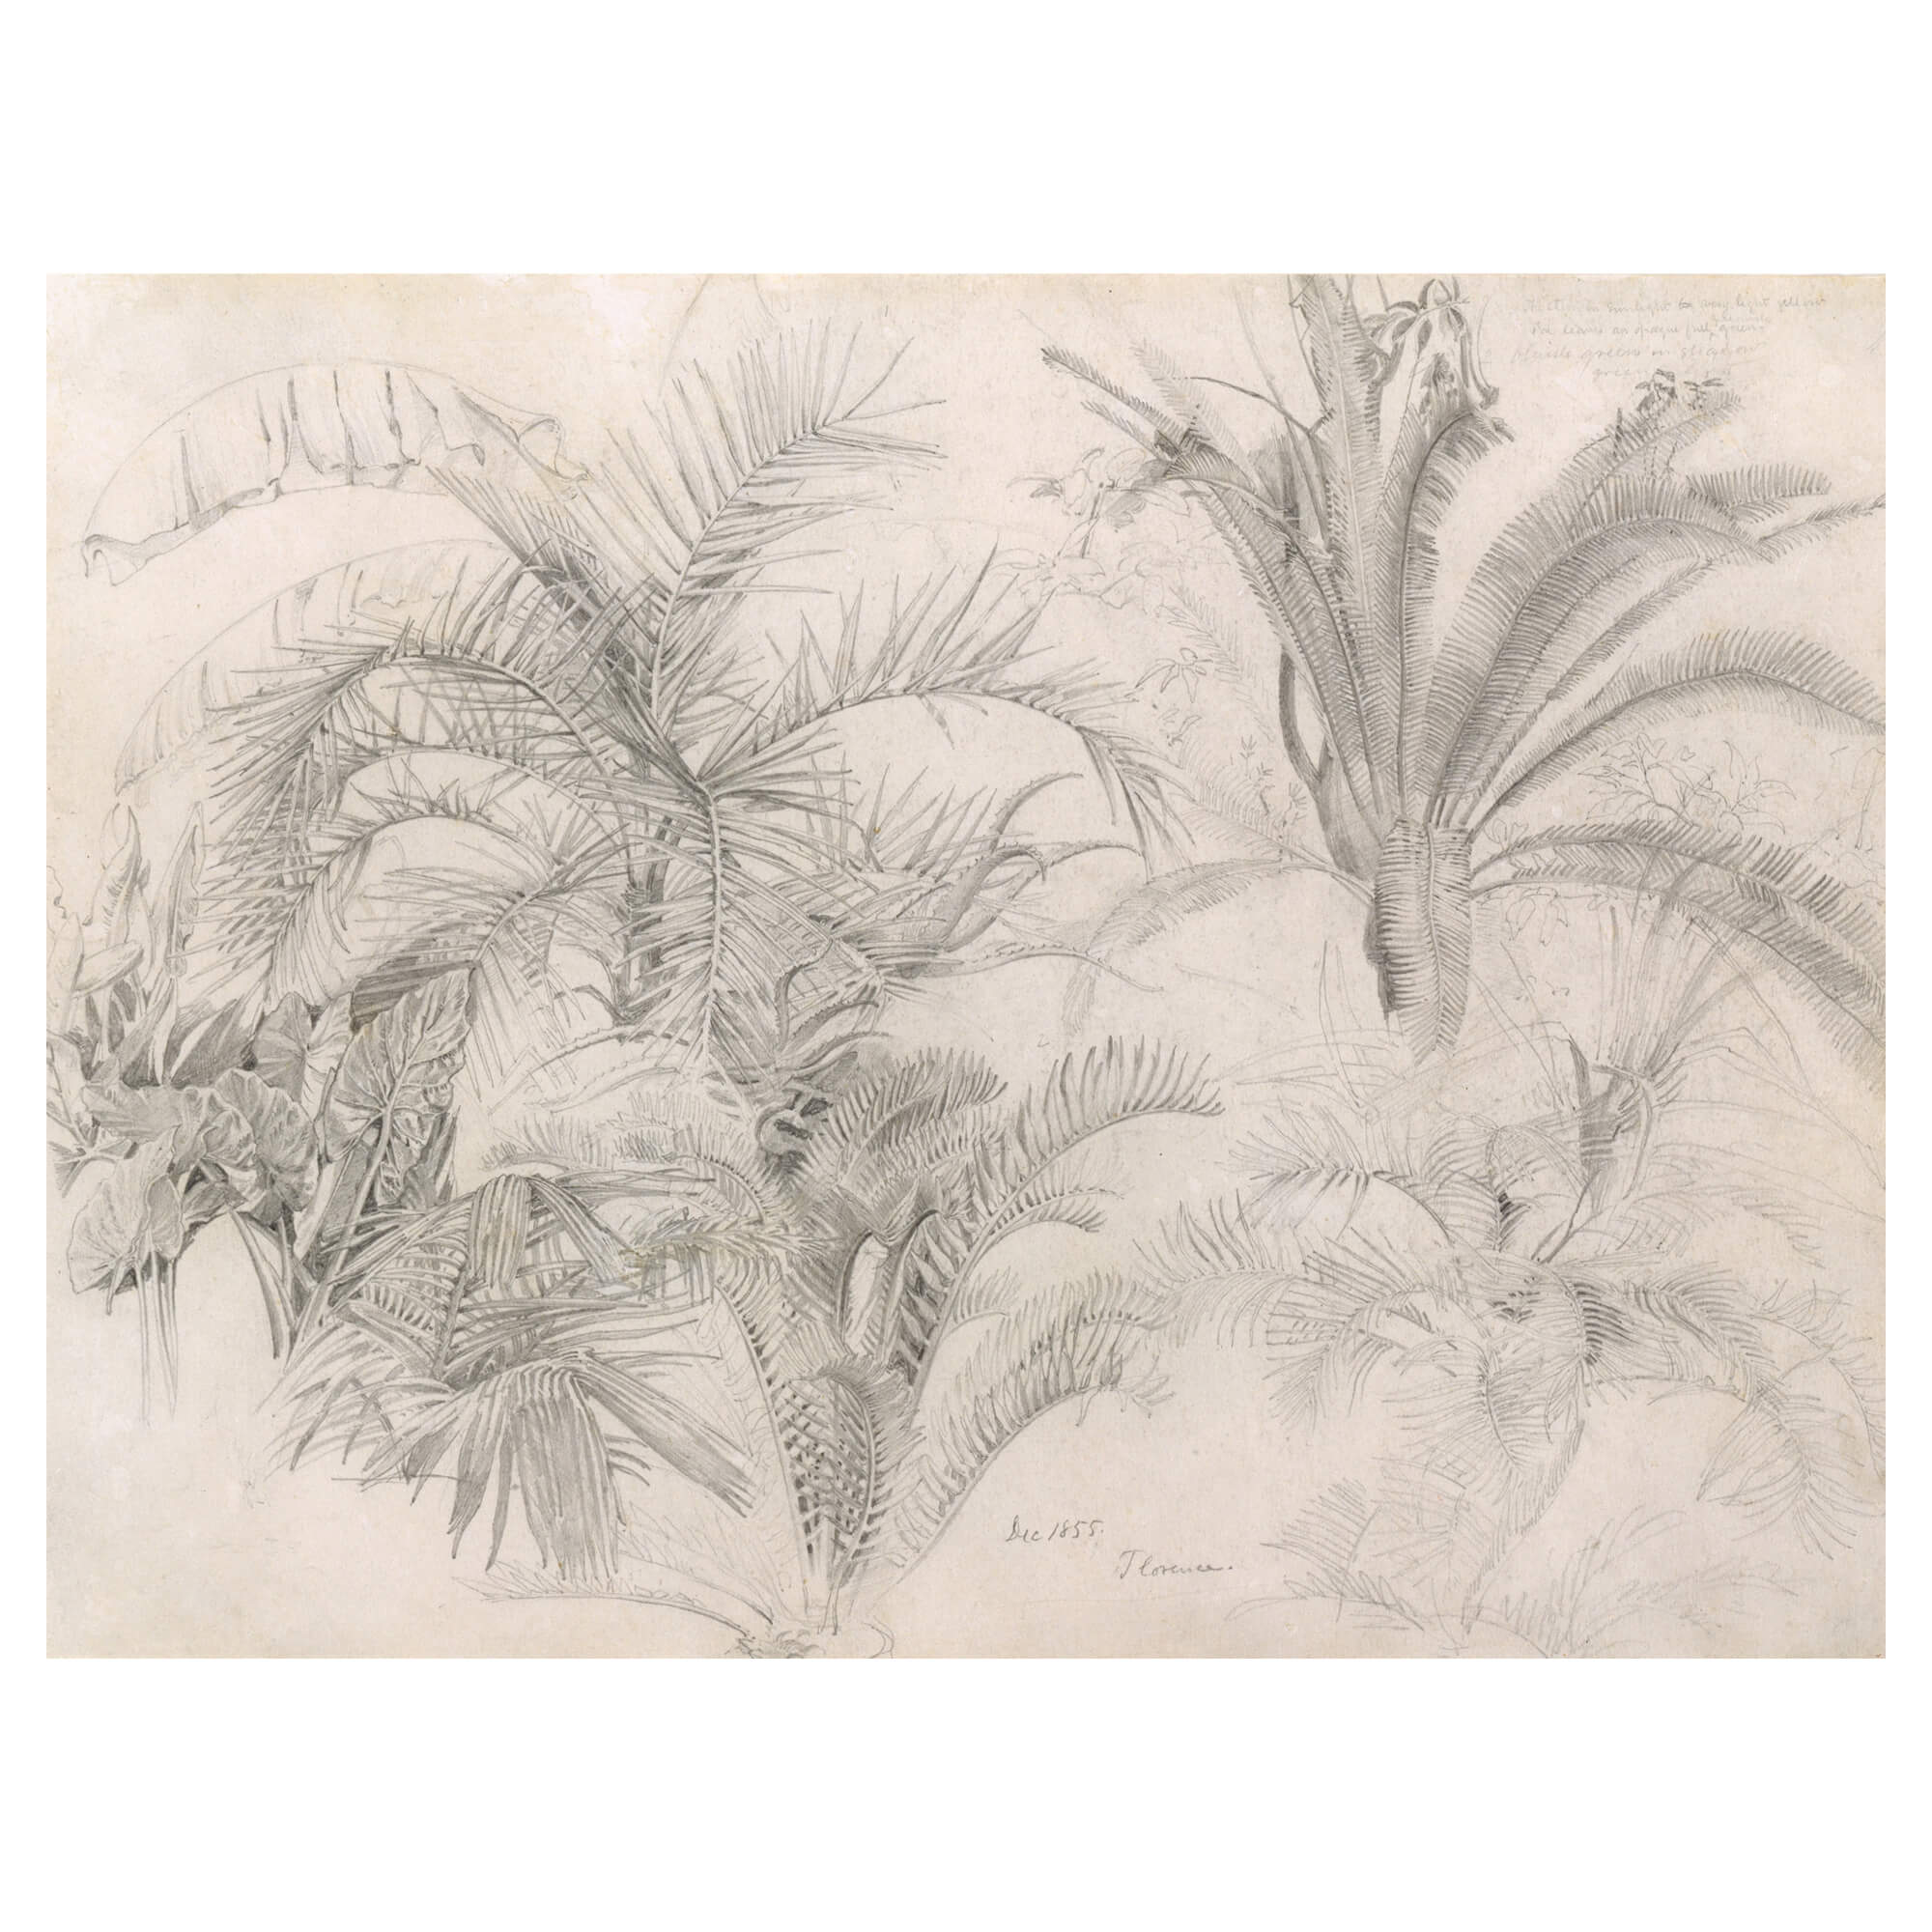 A sketch of different kinds of tropical plants